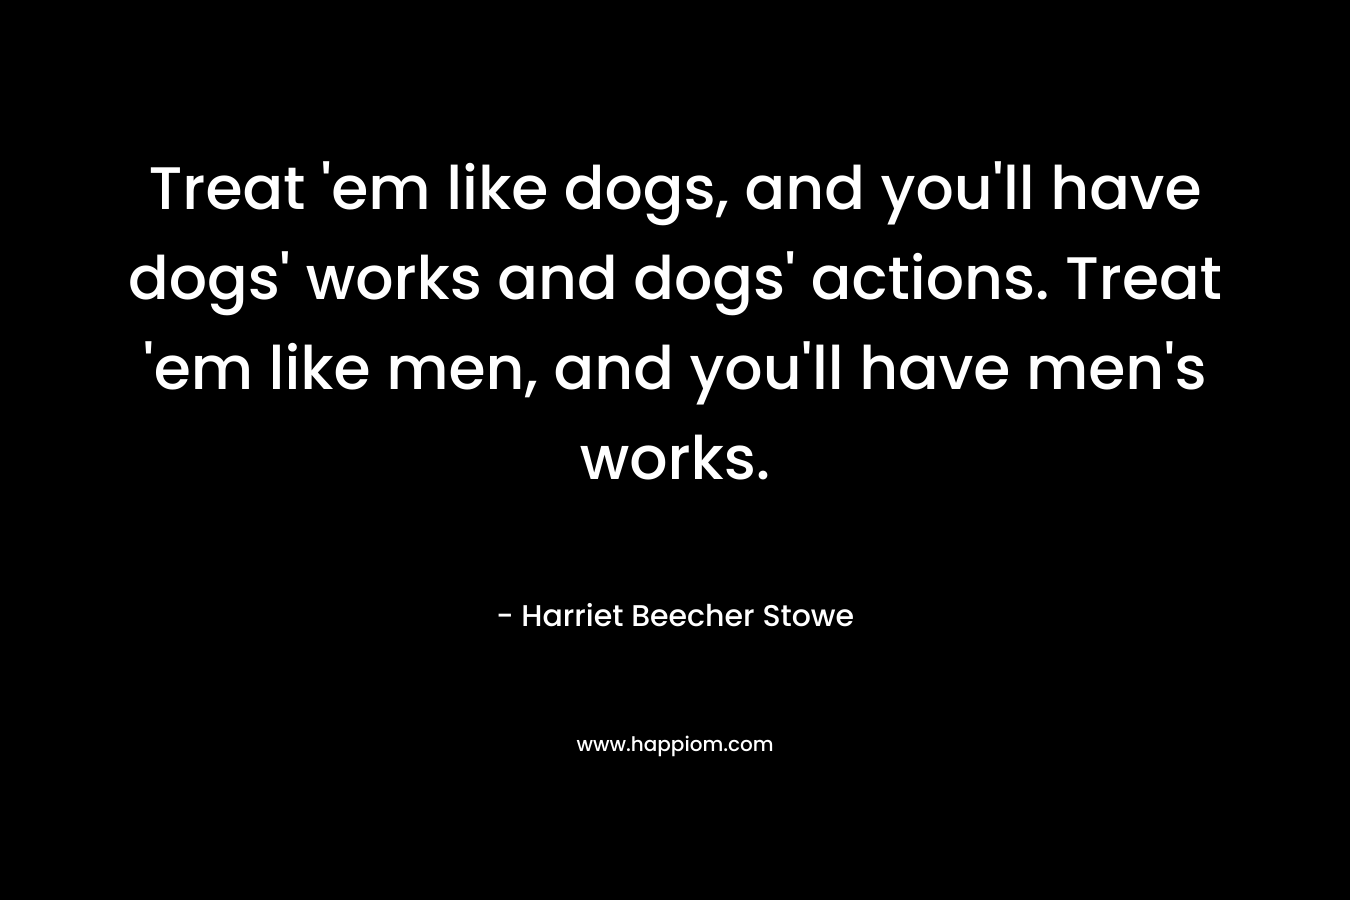 Treat 'em like dogs, and you'll have dogs' works and dogs' actions. Treat 'em like men, and you'll have men's works.